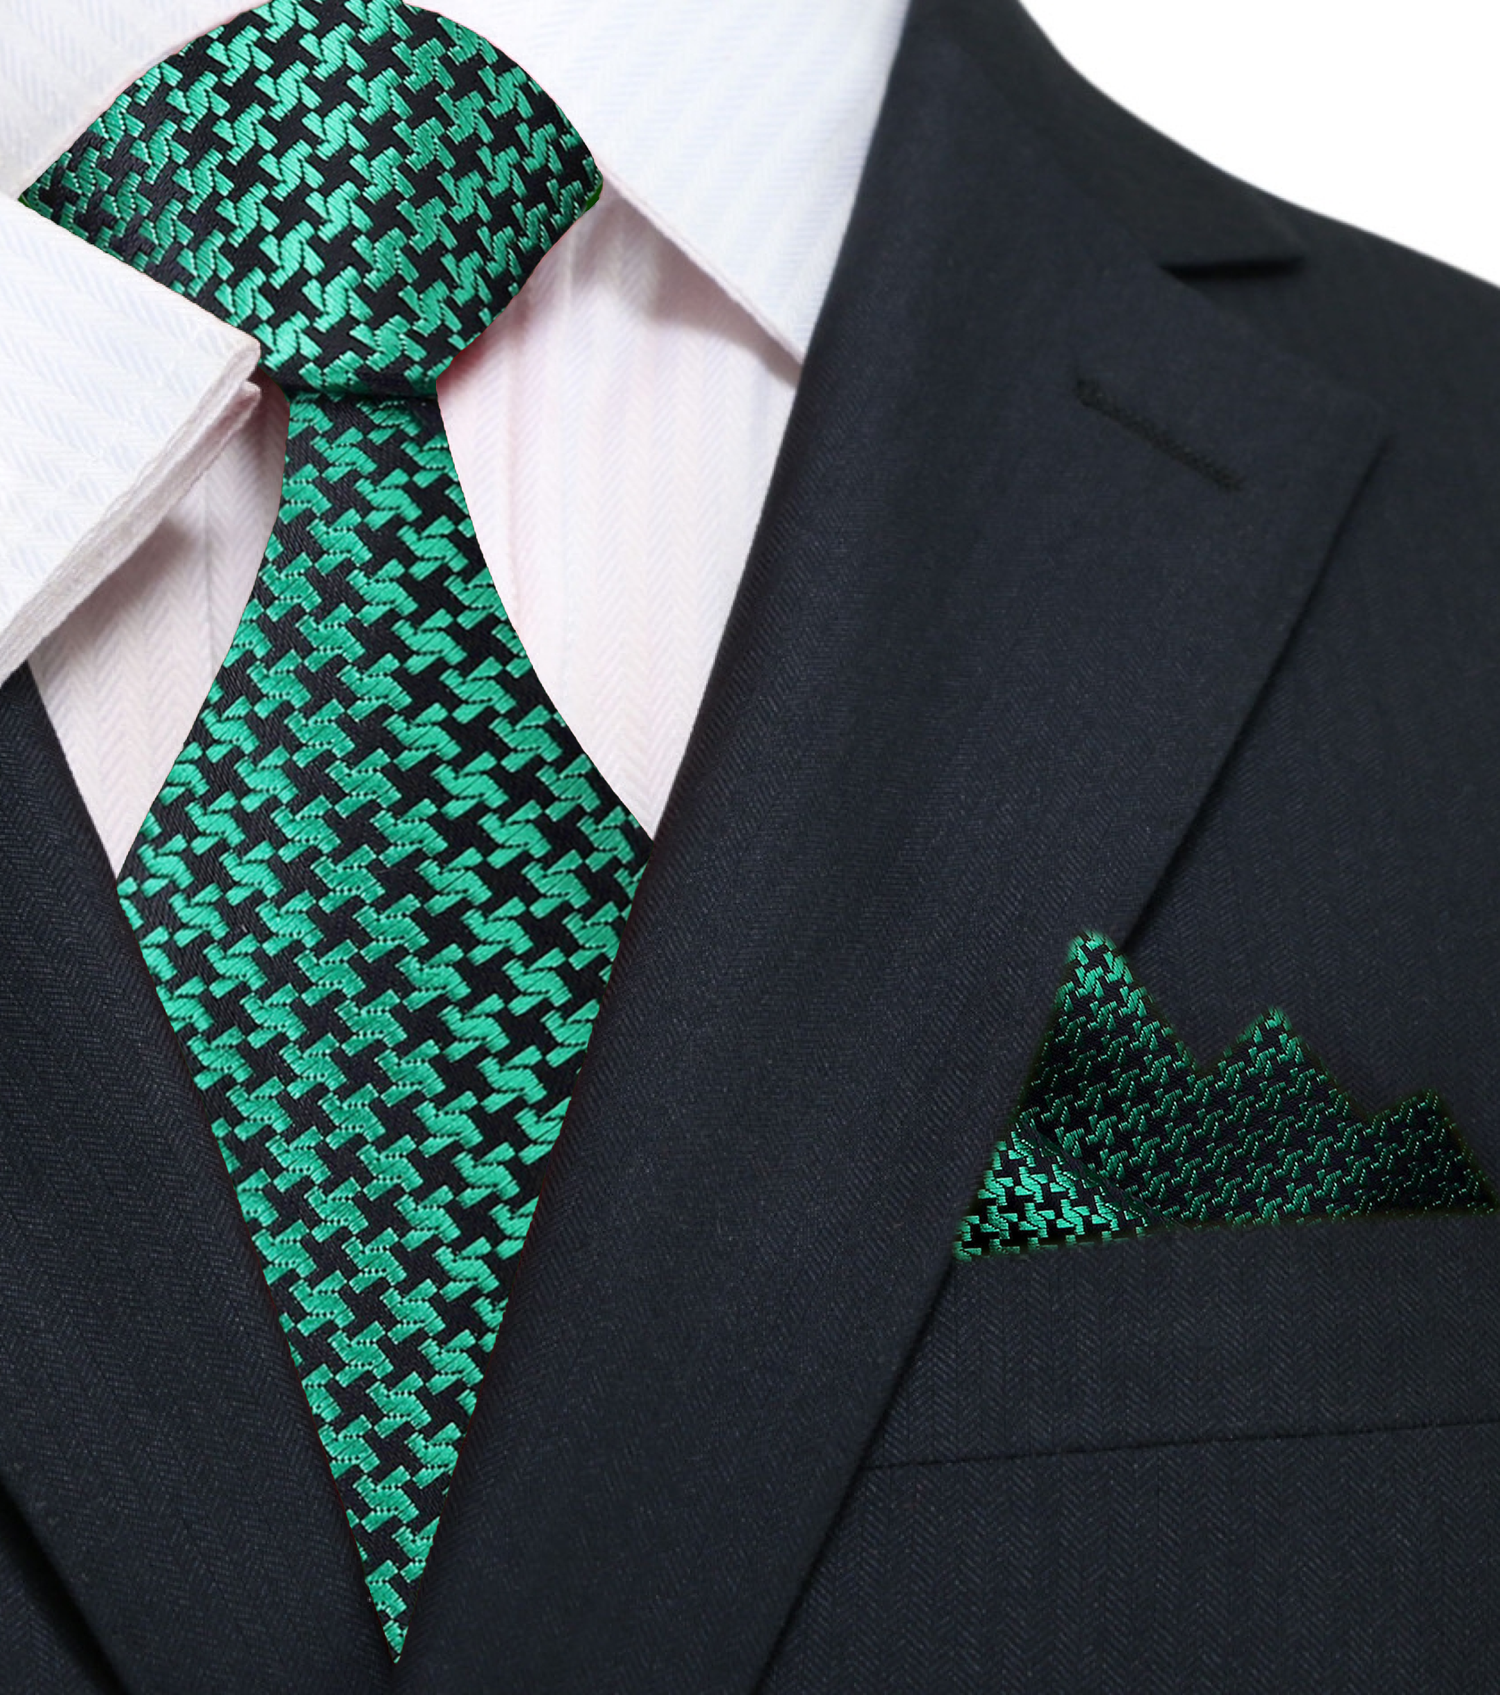 Main: Green, Black Hounds Tooth Tie and Square||Green/Black